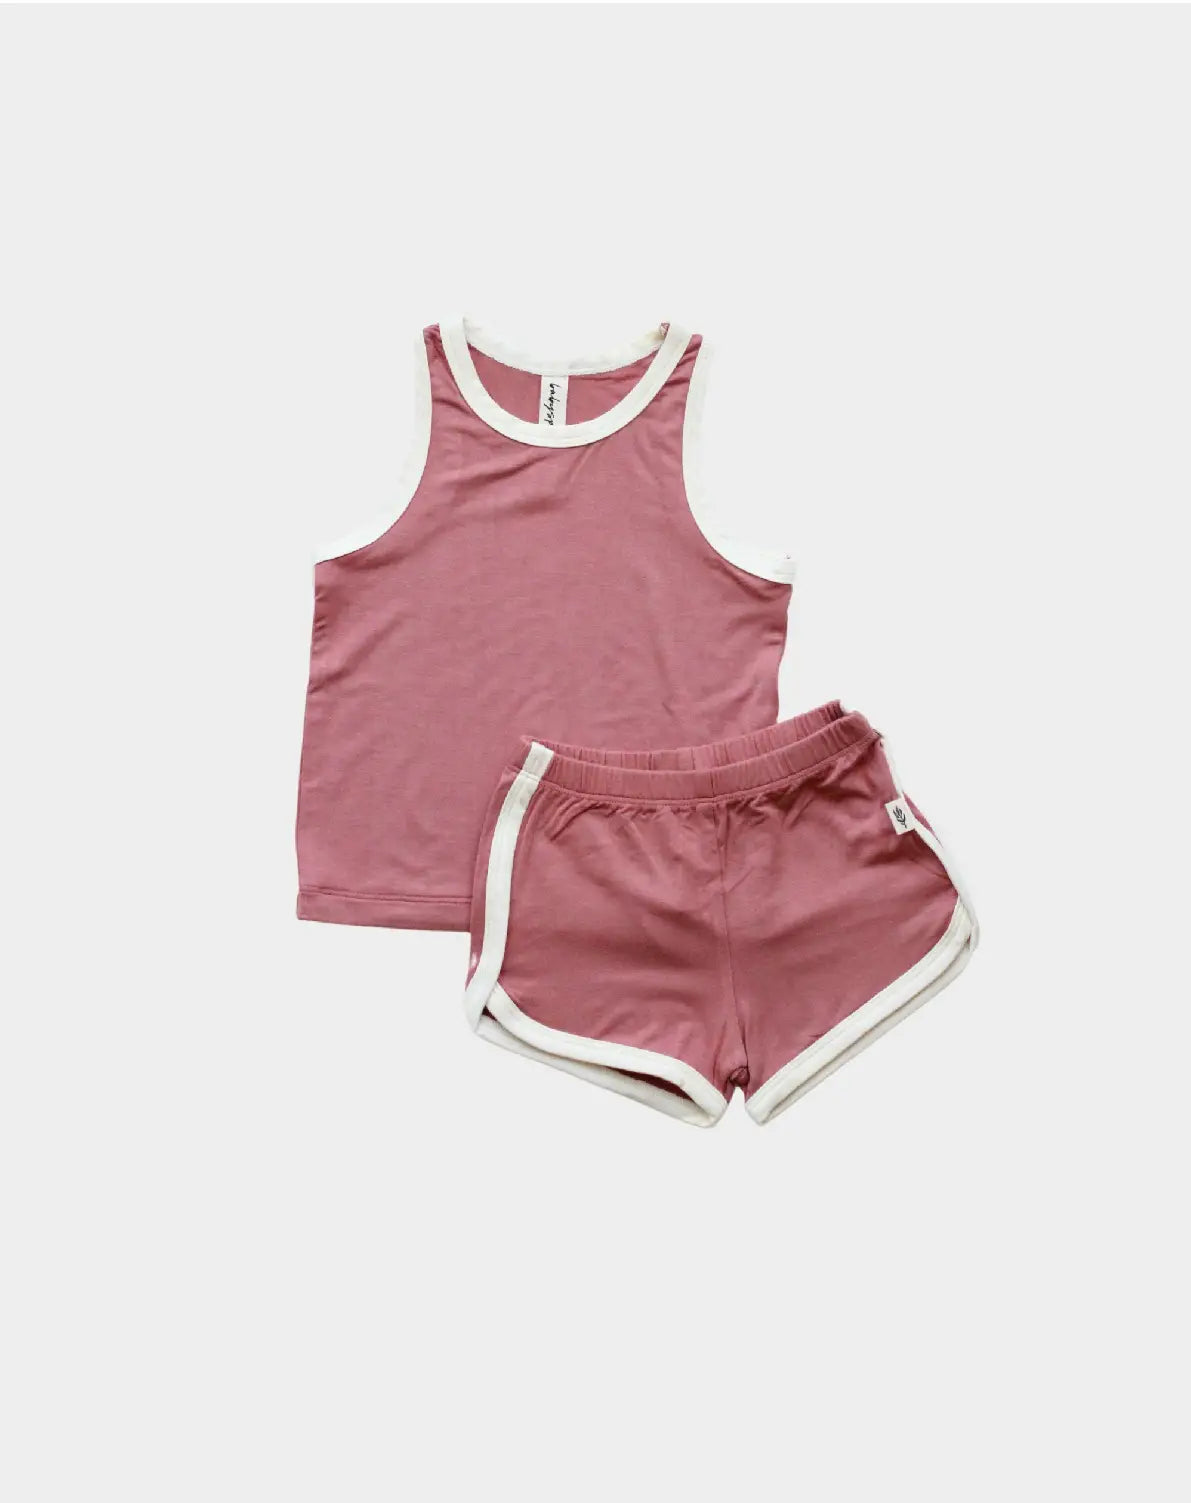 babysprouts clothing company - Track Set in Rose